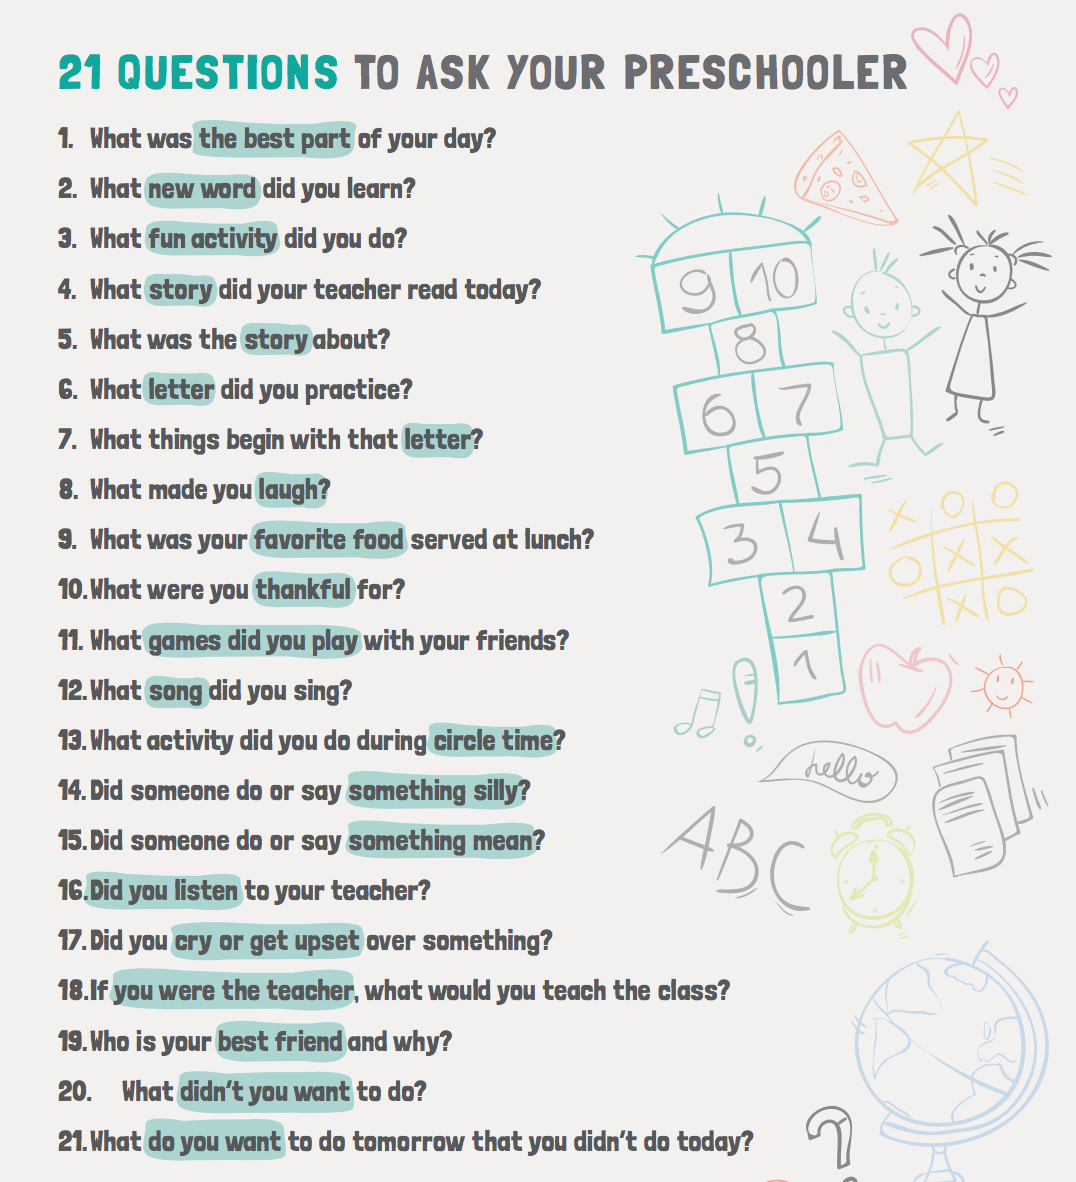 21 Questions to Ask Your Preschooler - Bloggy Moms Magazine